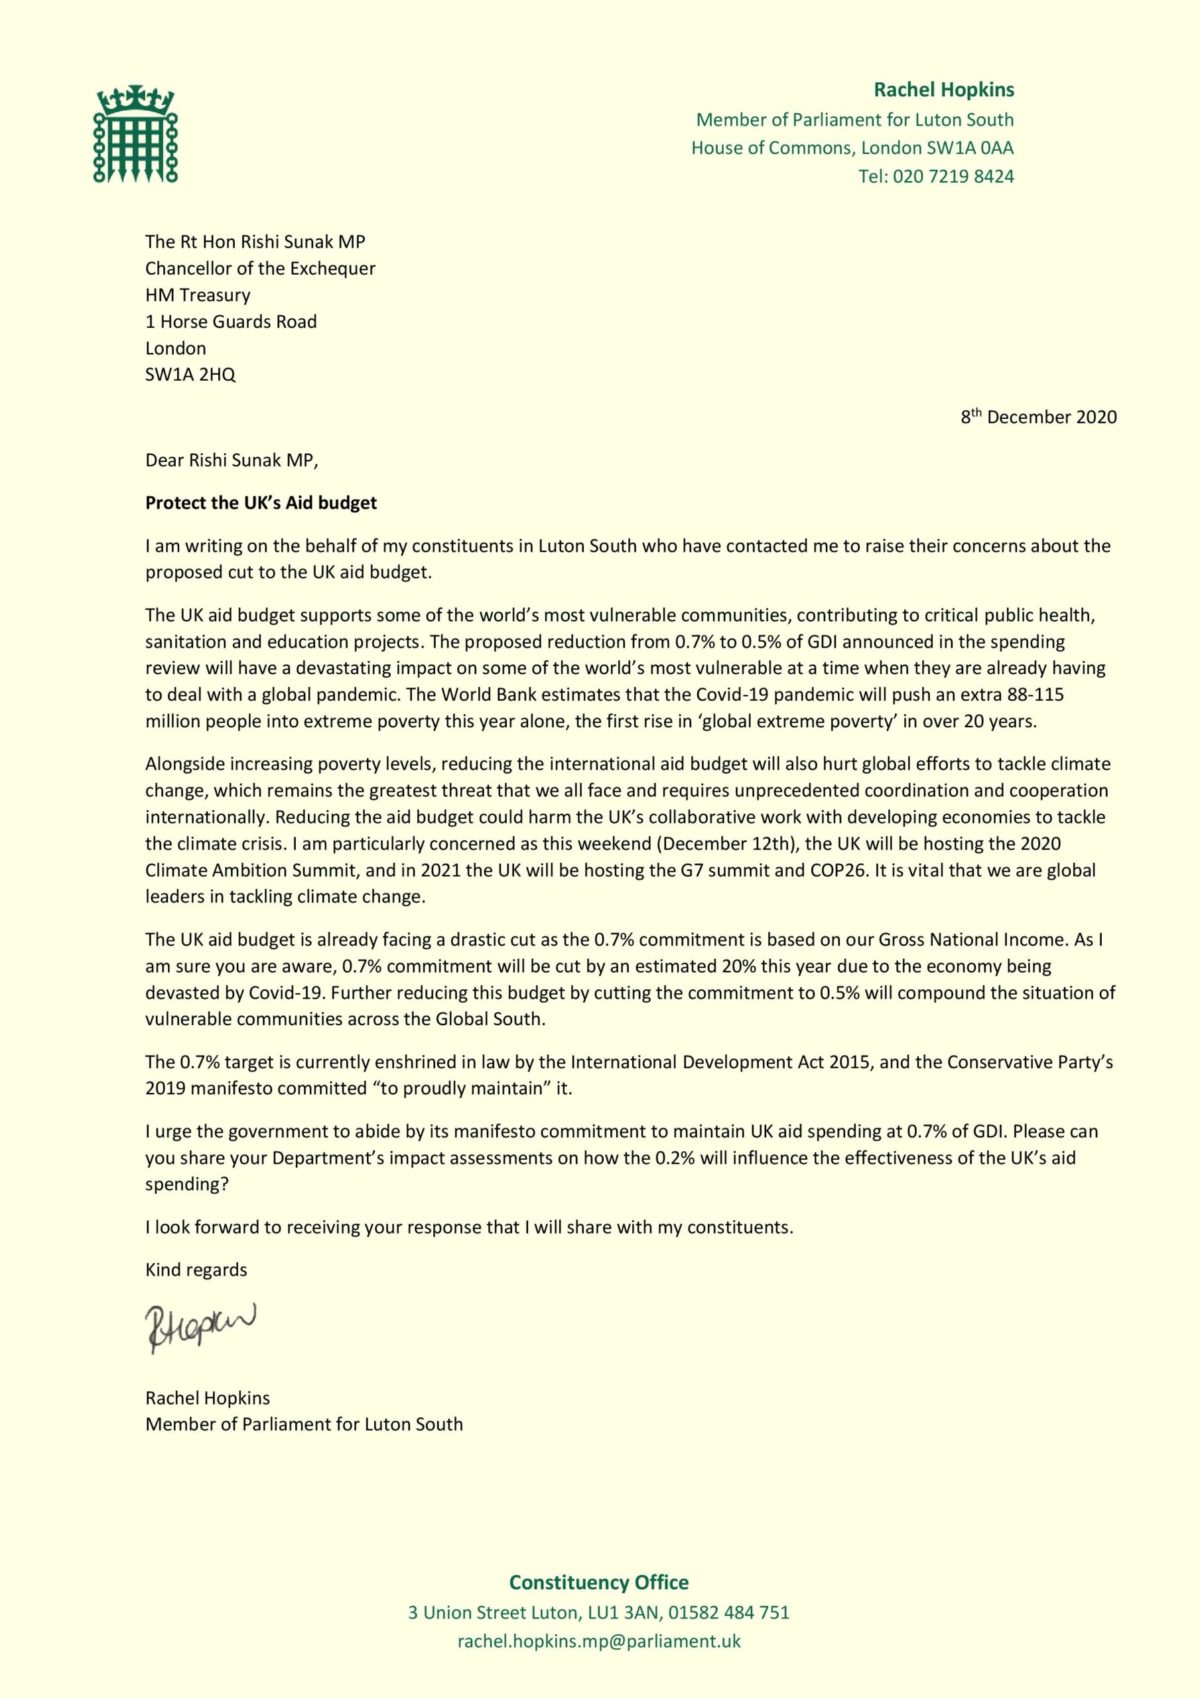 Letter to the Chancellor opposing cuts to foreign aid.